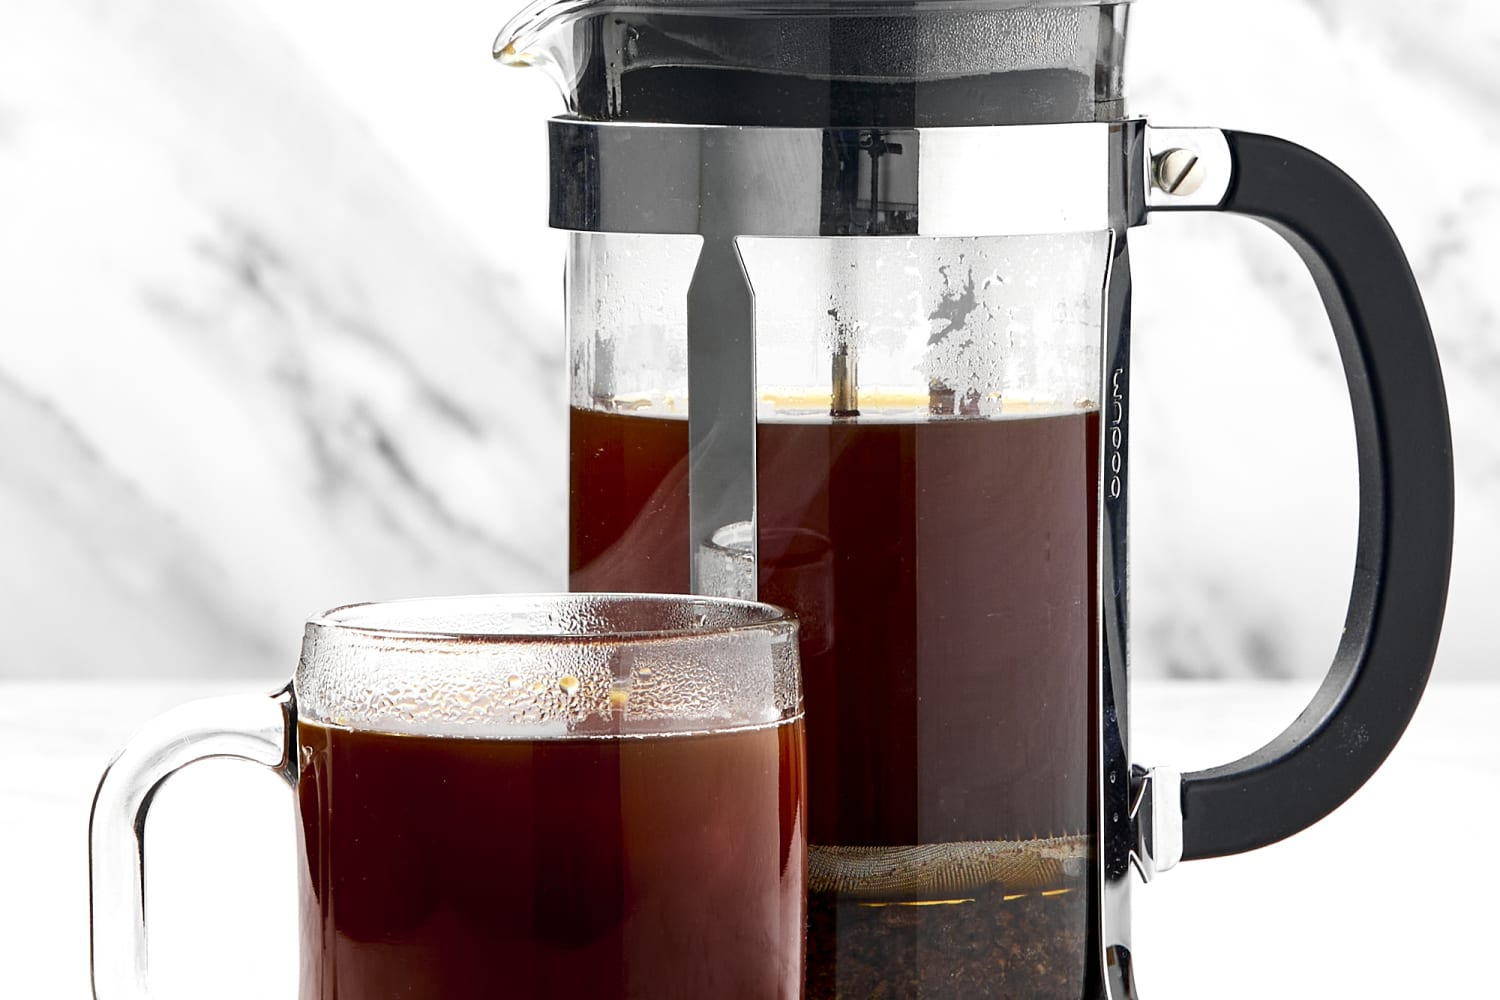 French Press Ratios And Methods - A Guide To Getting The Perfect